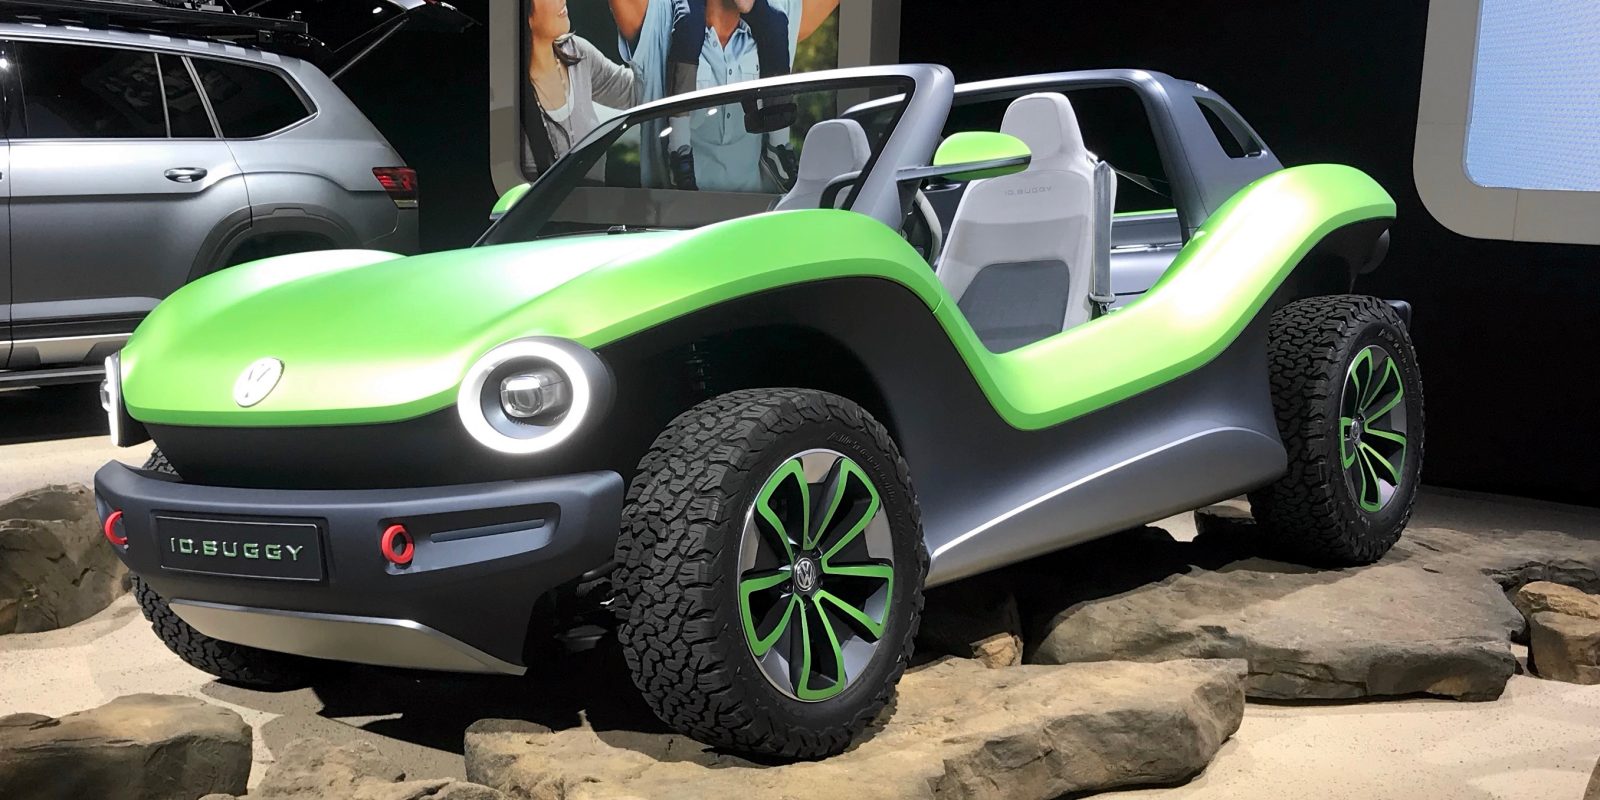 Electric vehicles at the 2019 New York Auto Show | Electrek